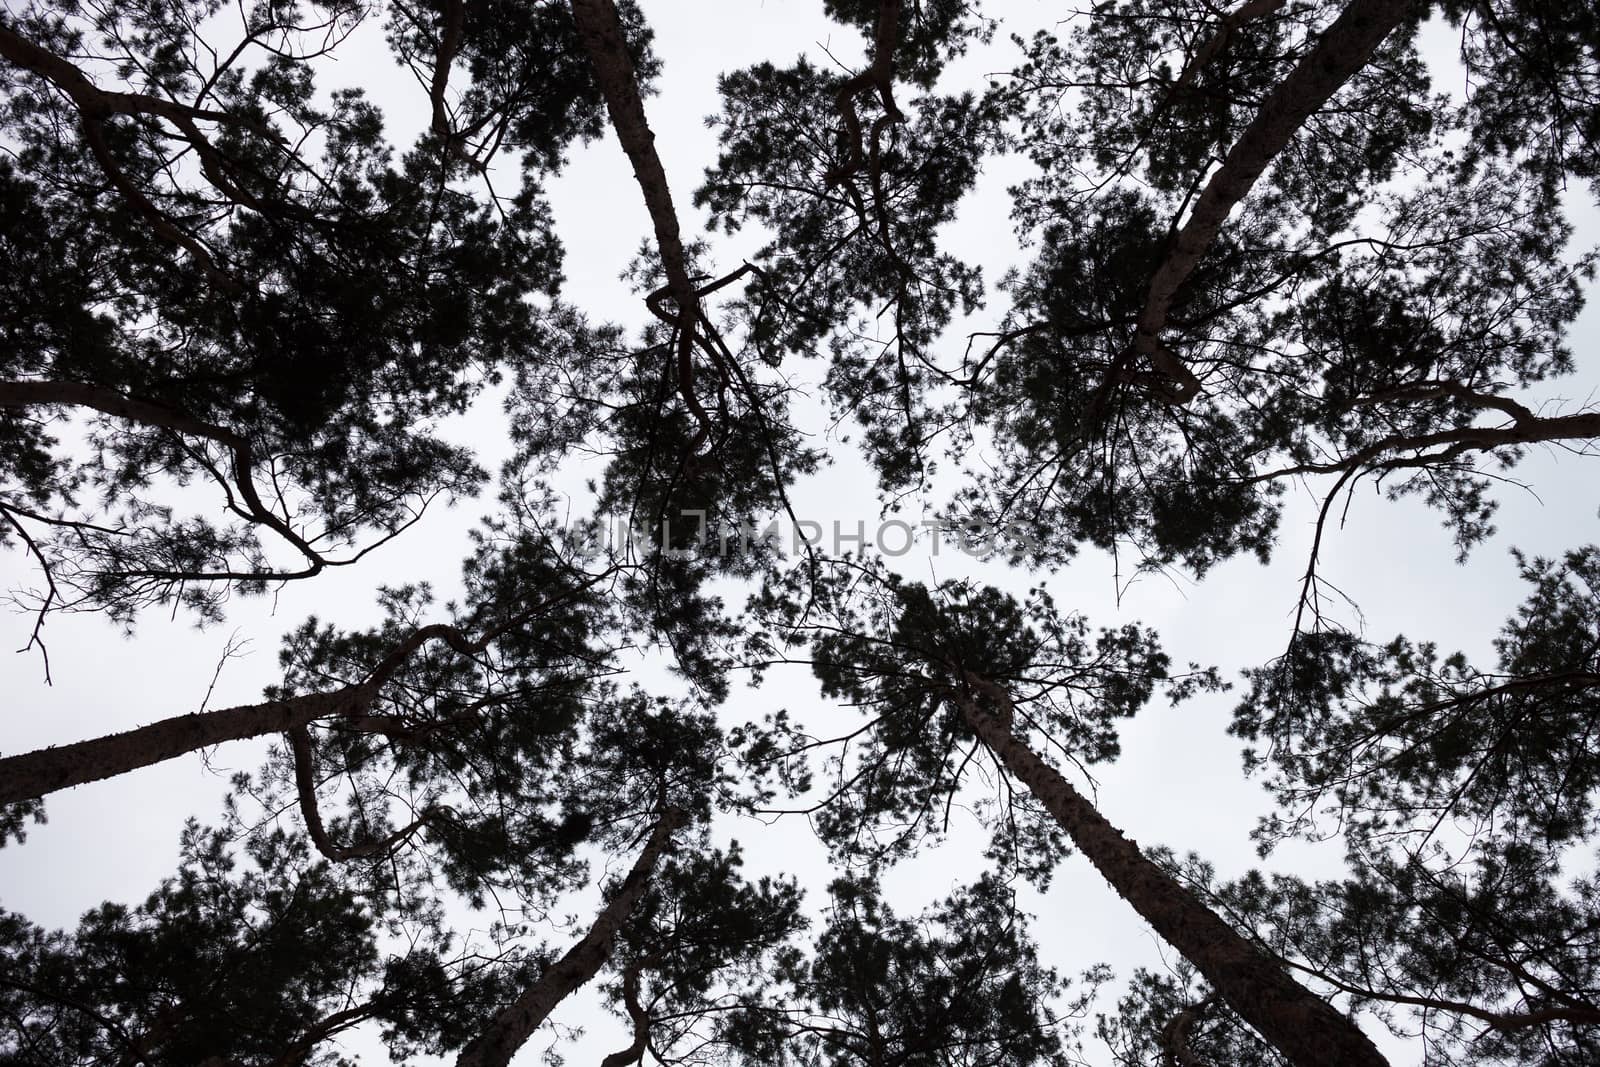 Silhouettes of the pine treetops against the sky.